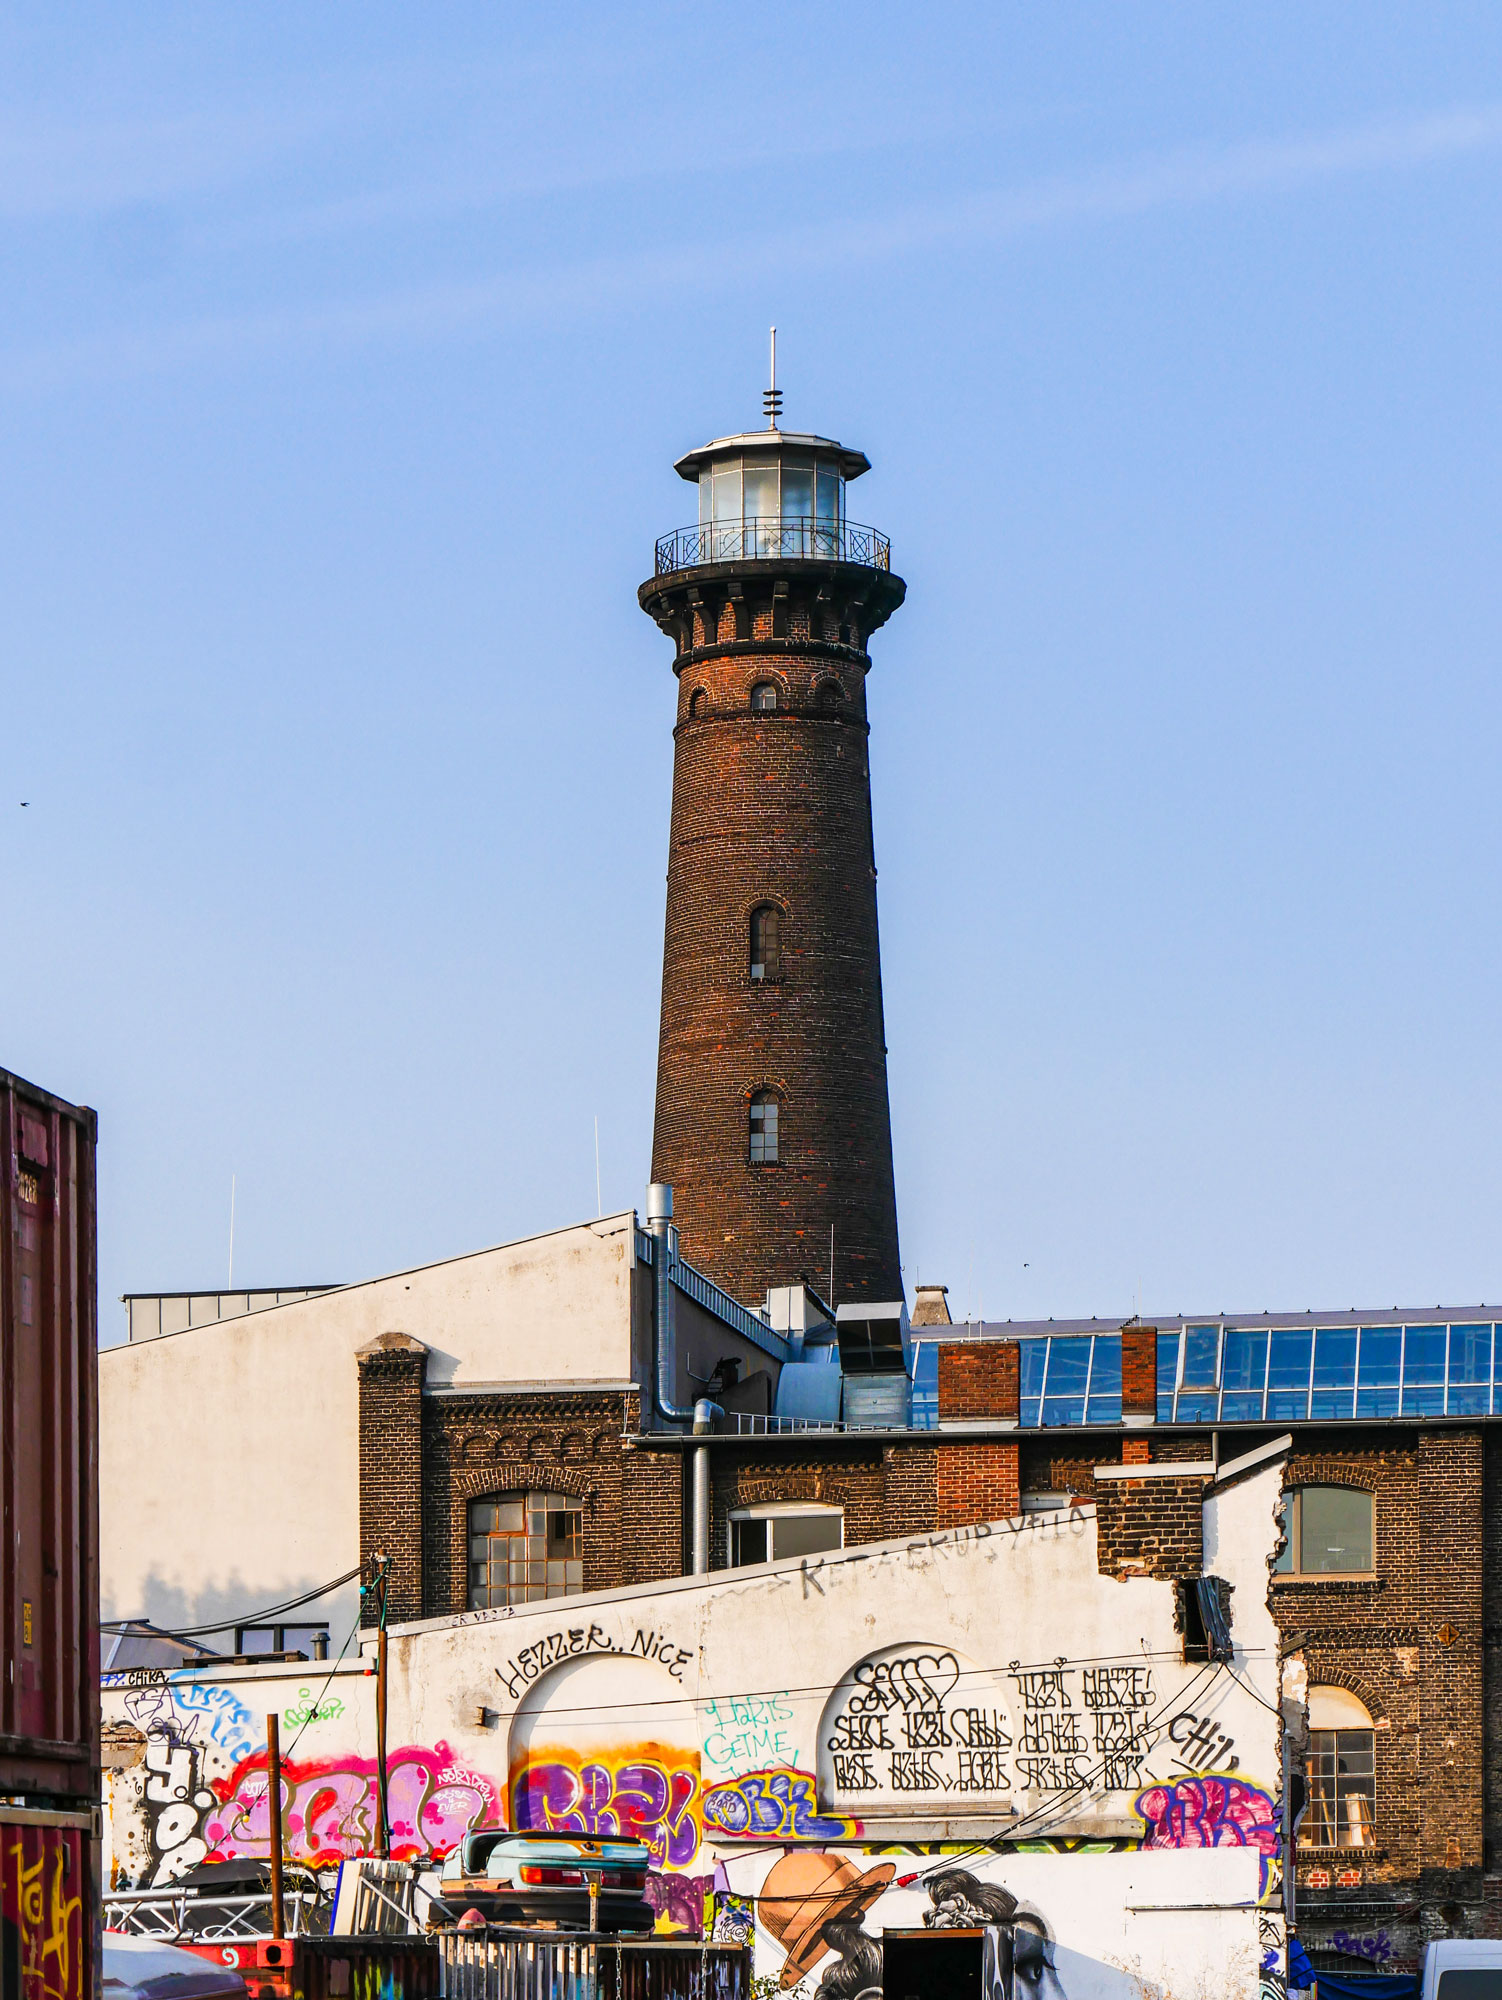 View of a lighthouse in the middle of Cologne. In front of it you can see half-dilapidated houses and walls that are full of graffiti.